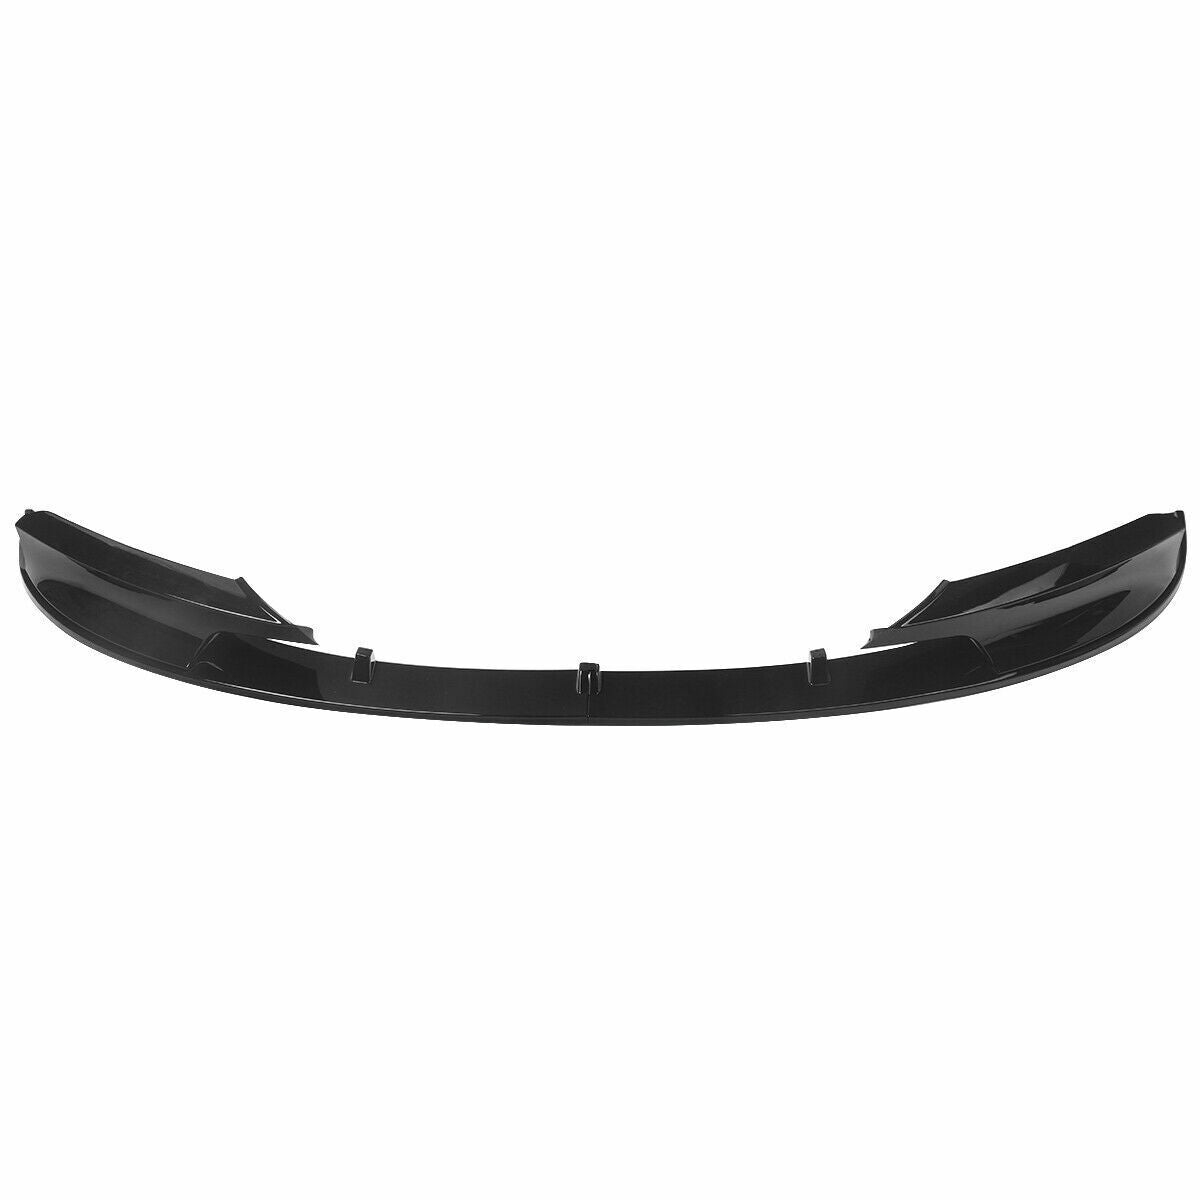 FOR BMW F30 F31 3 SERIES M STYLE FRONT LIP SPOILER SPLITTER GLOSS BLAC